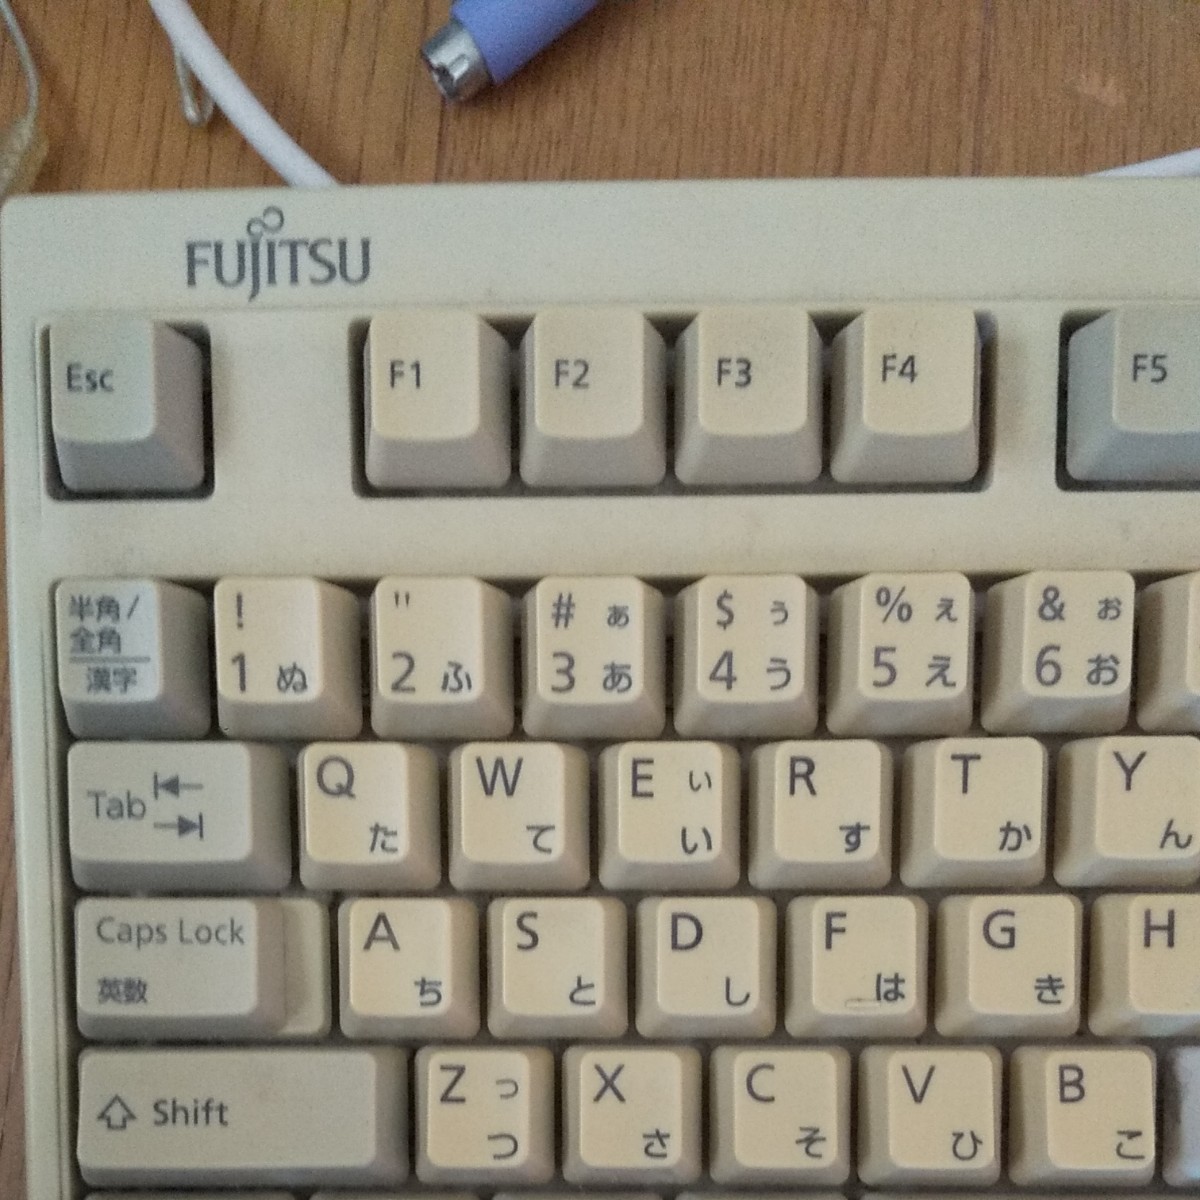 USBキーボードマウスセット